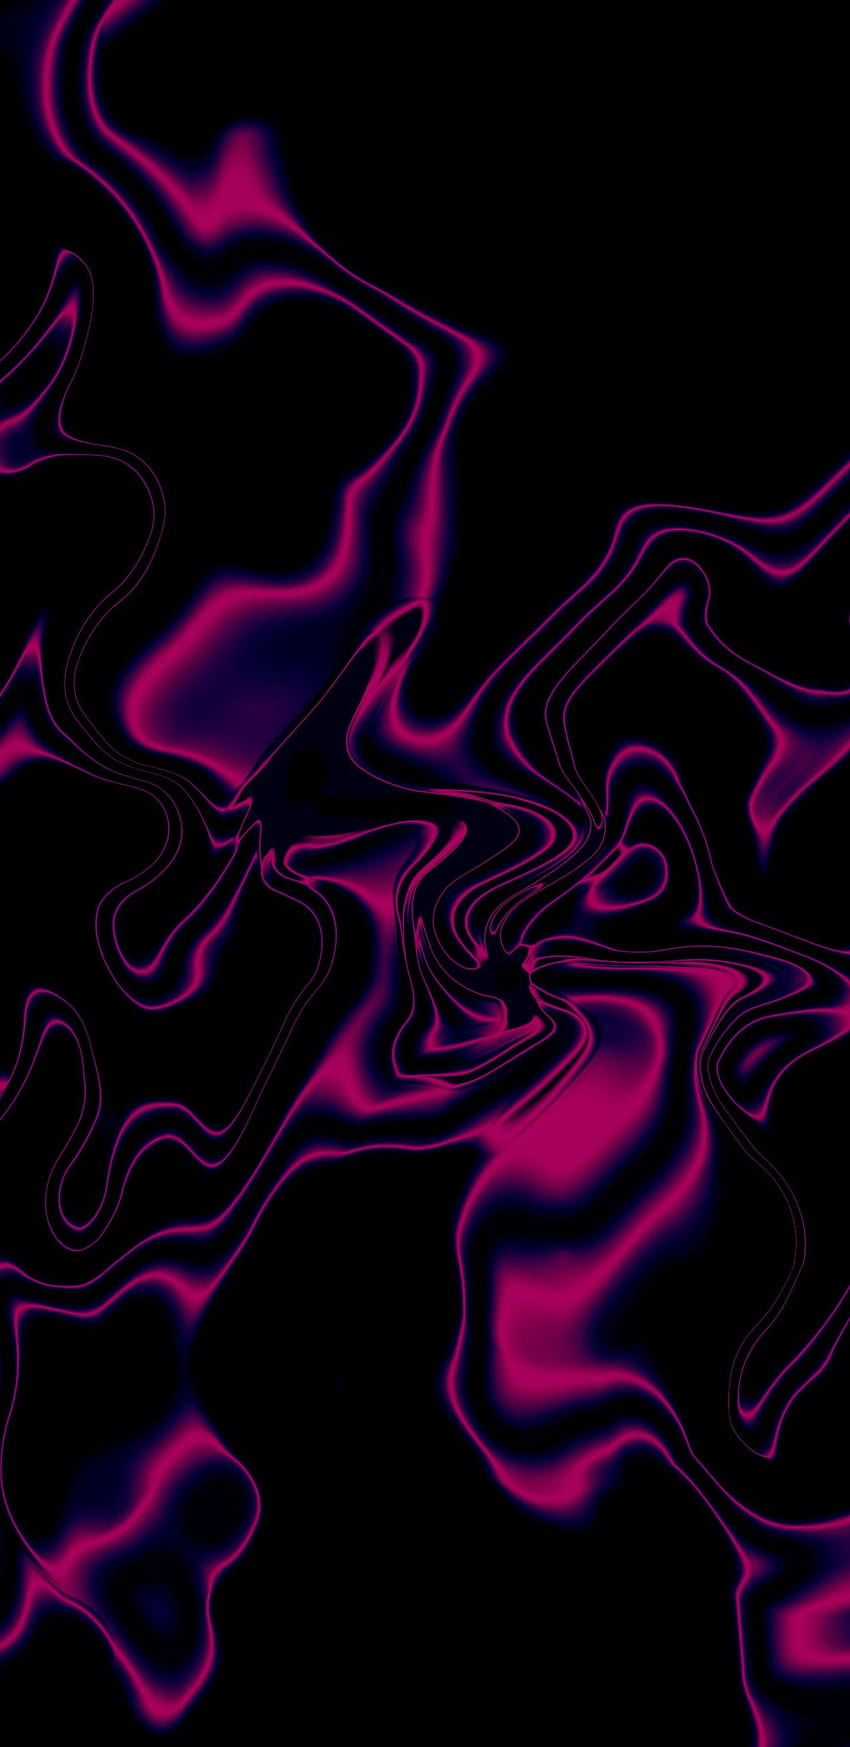 A purple and black abstract artwork - Trippy